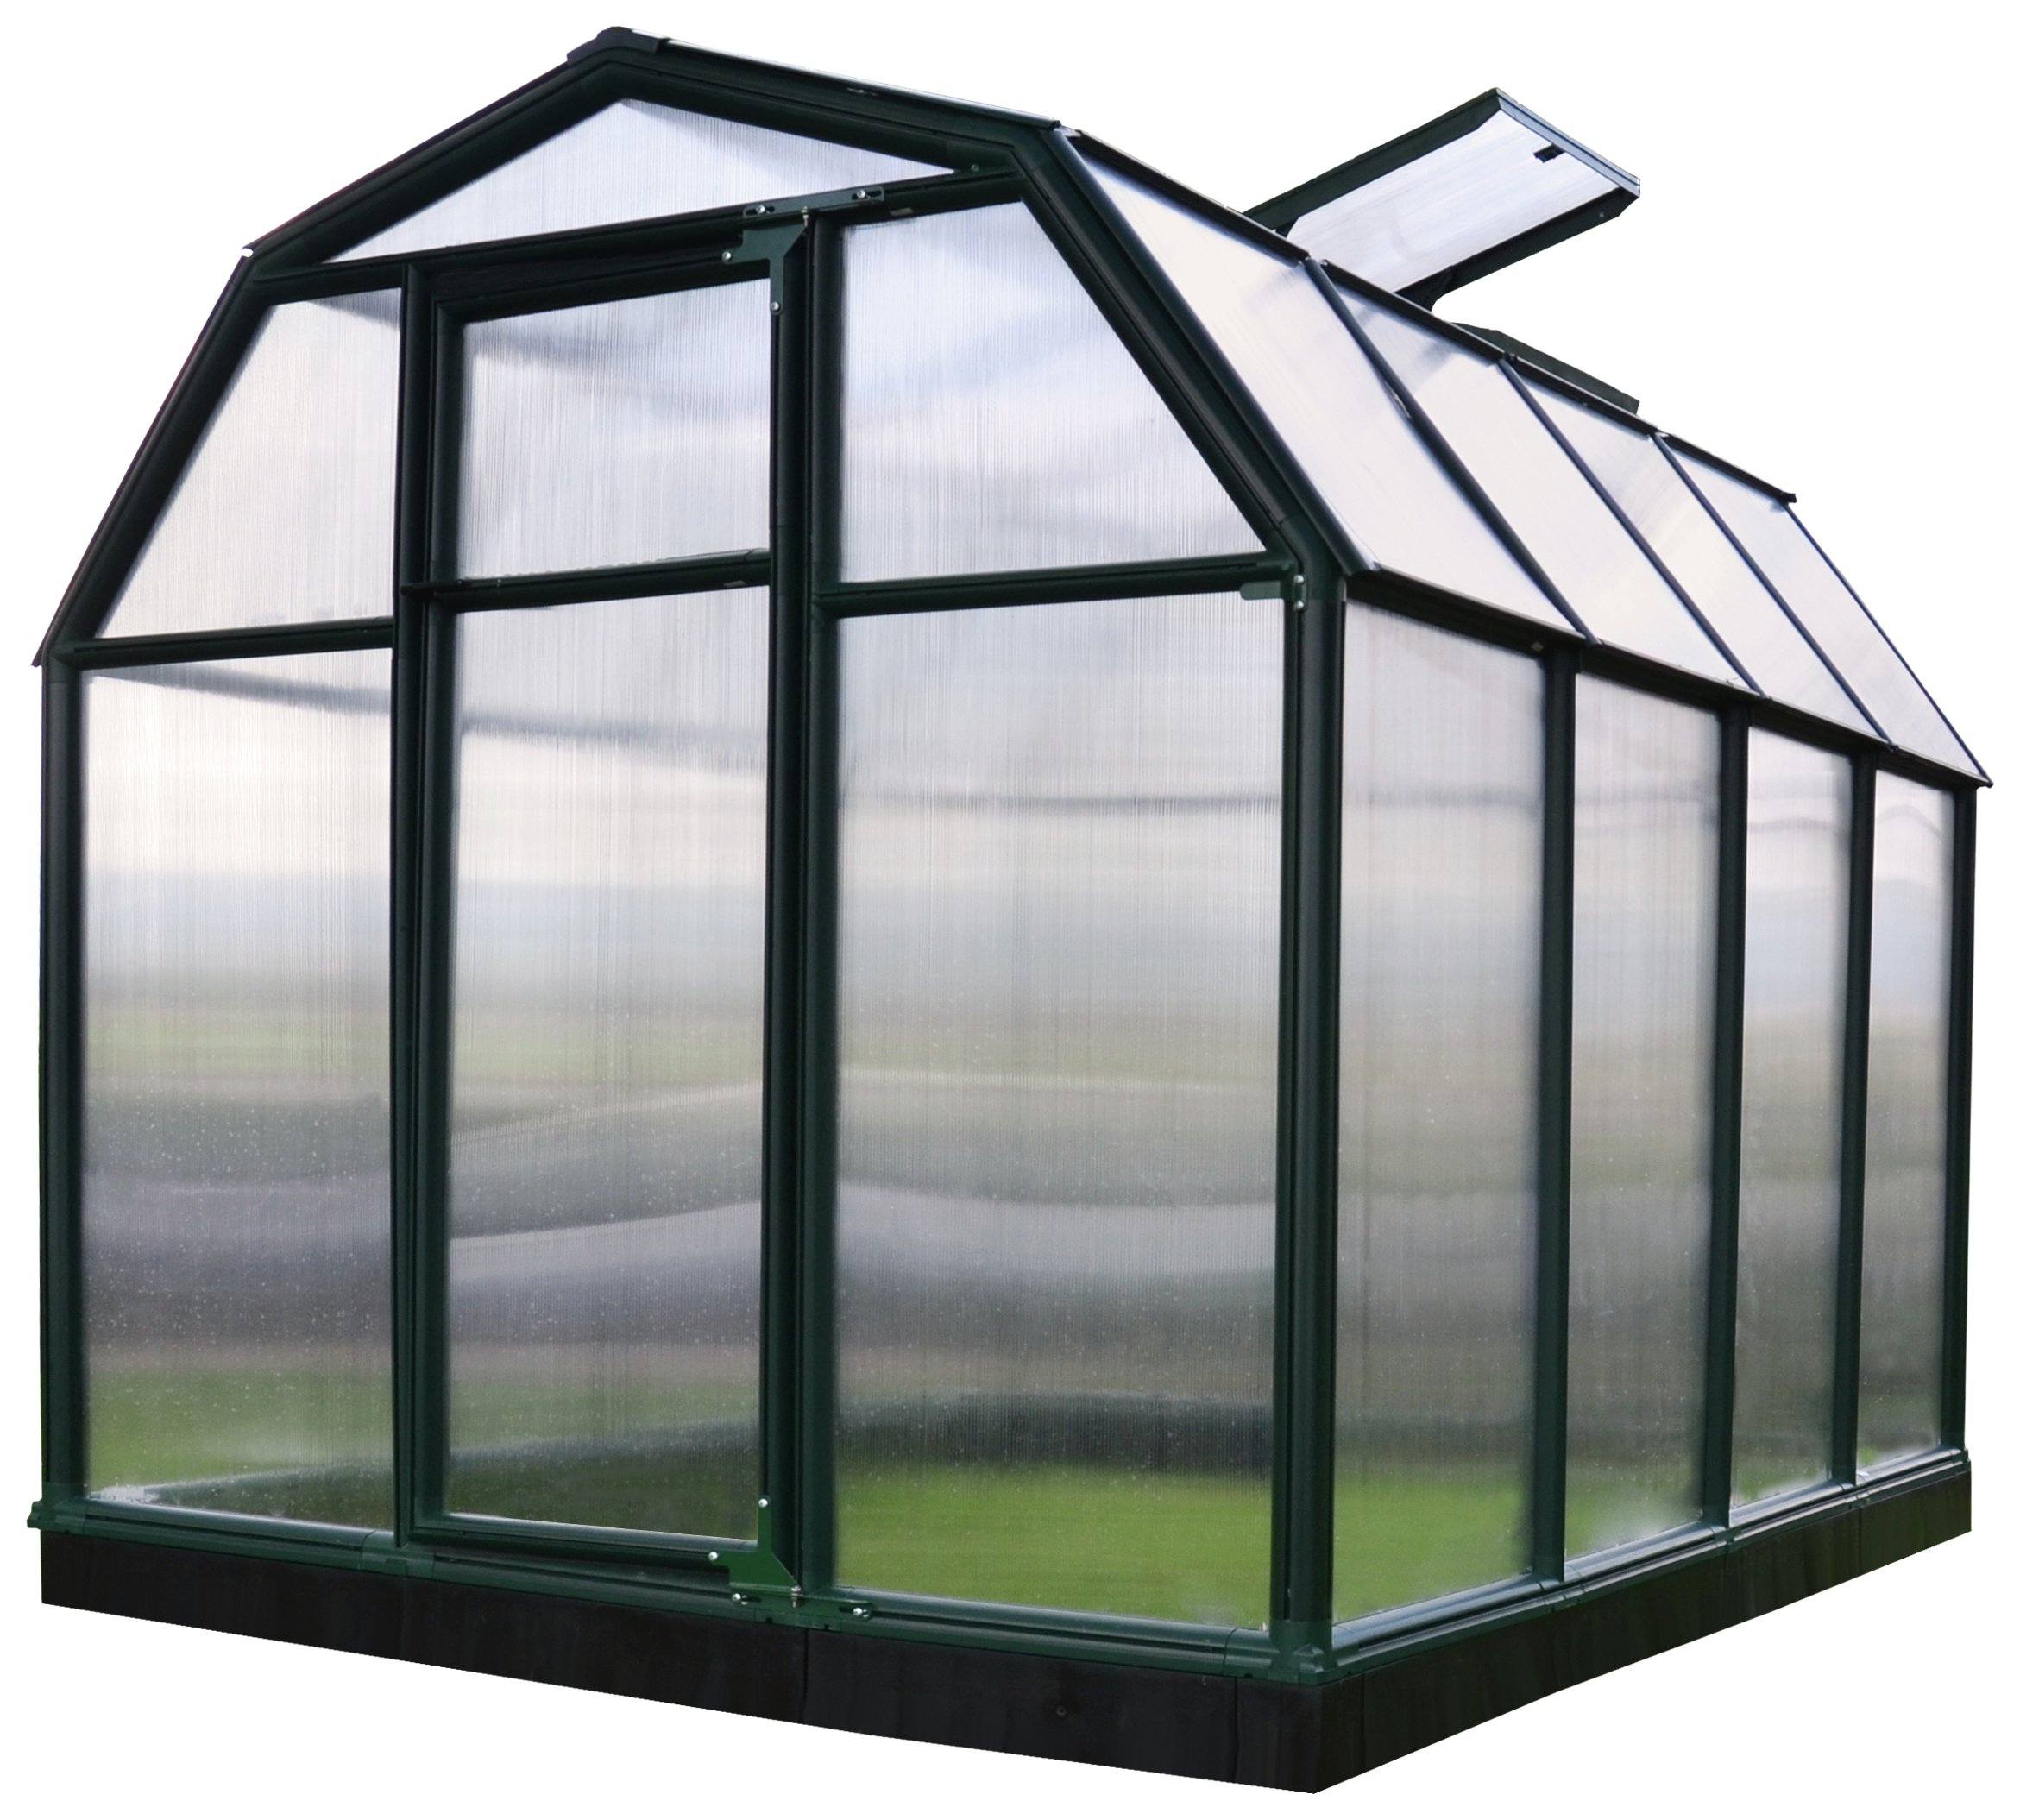 Palram Rion Eco Green Greenhouse - 6 x 8ft